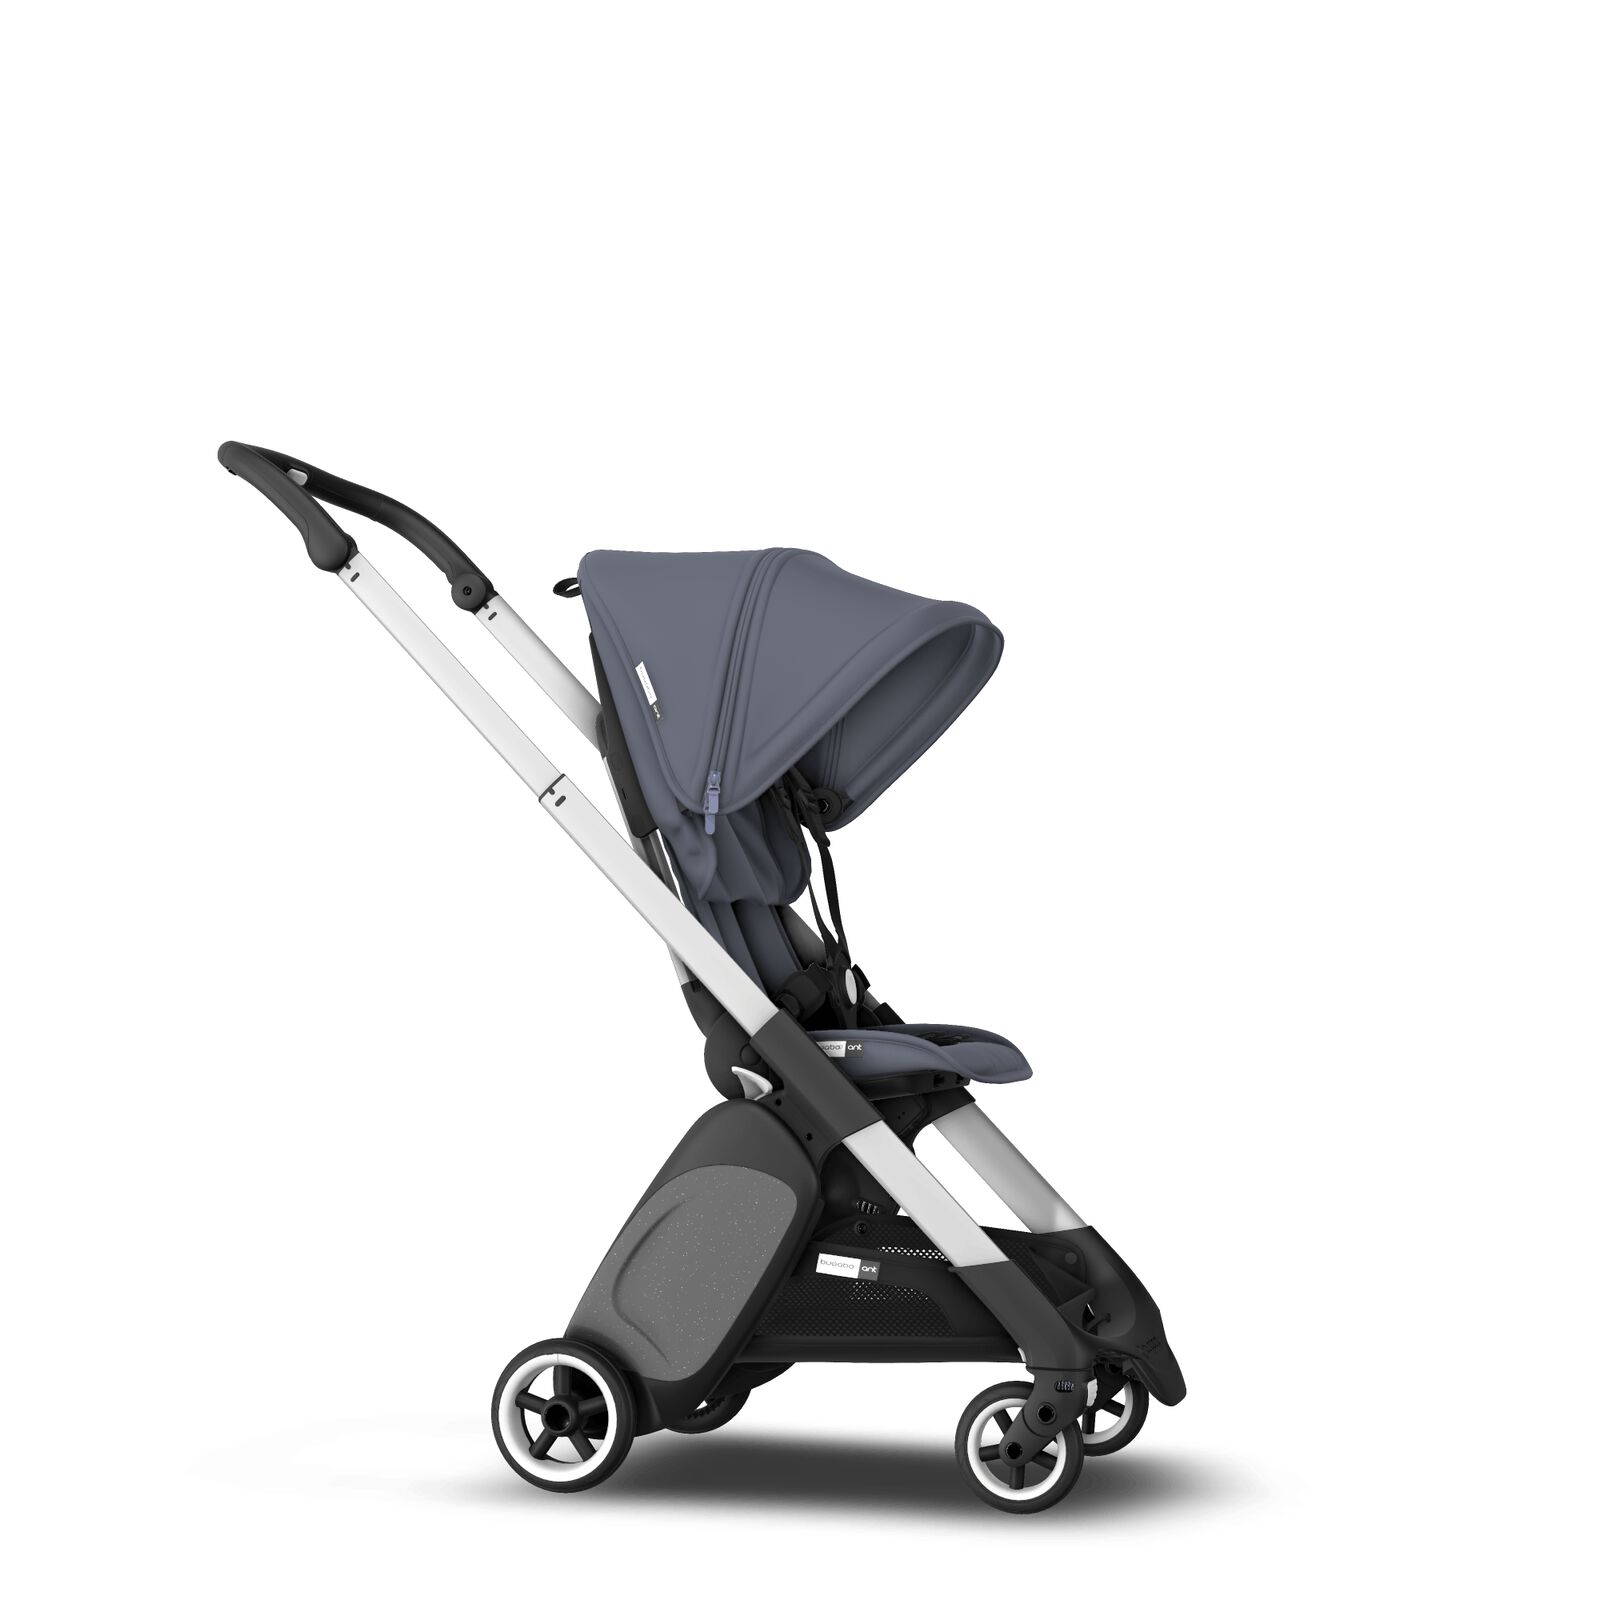 Bugaboo Ant ultra compact stroller - View 4